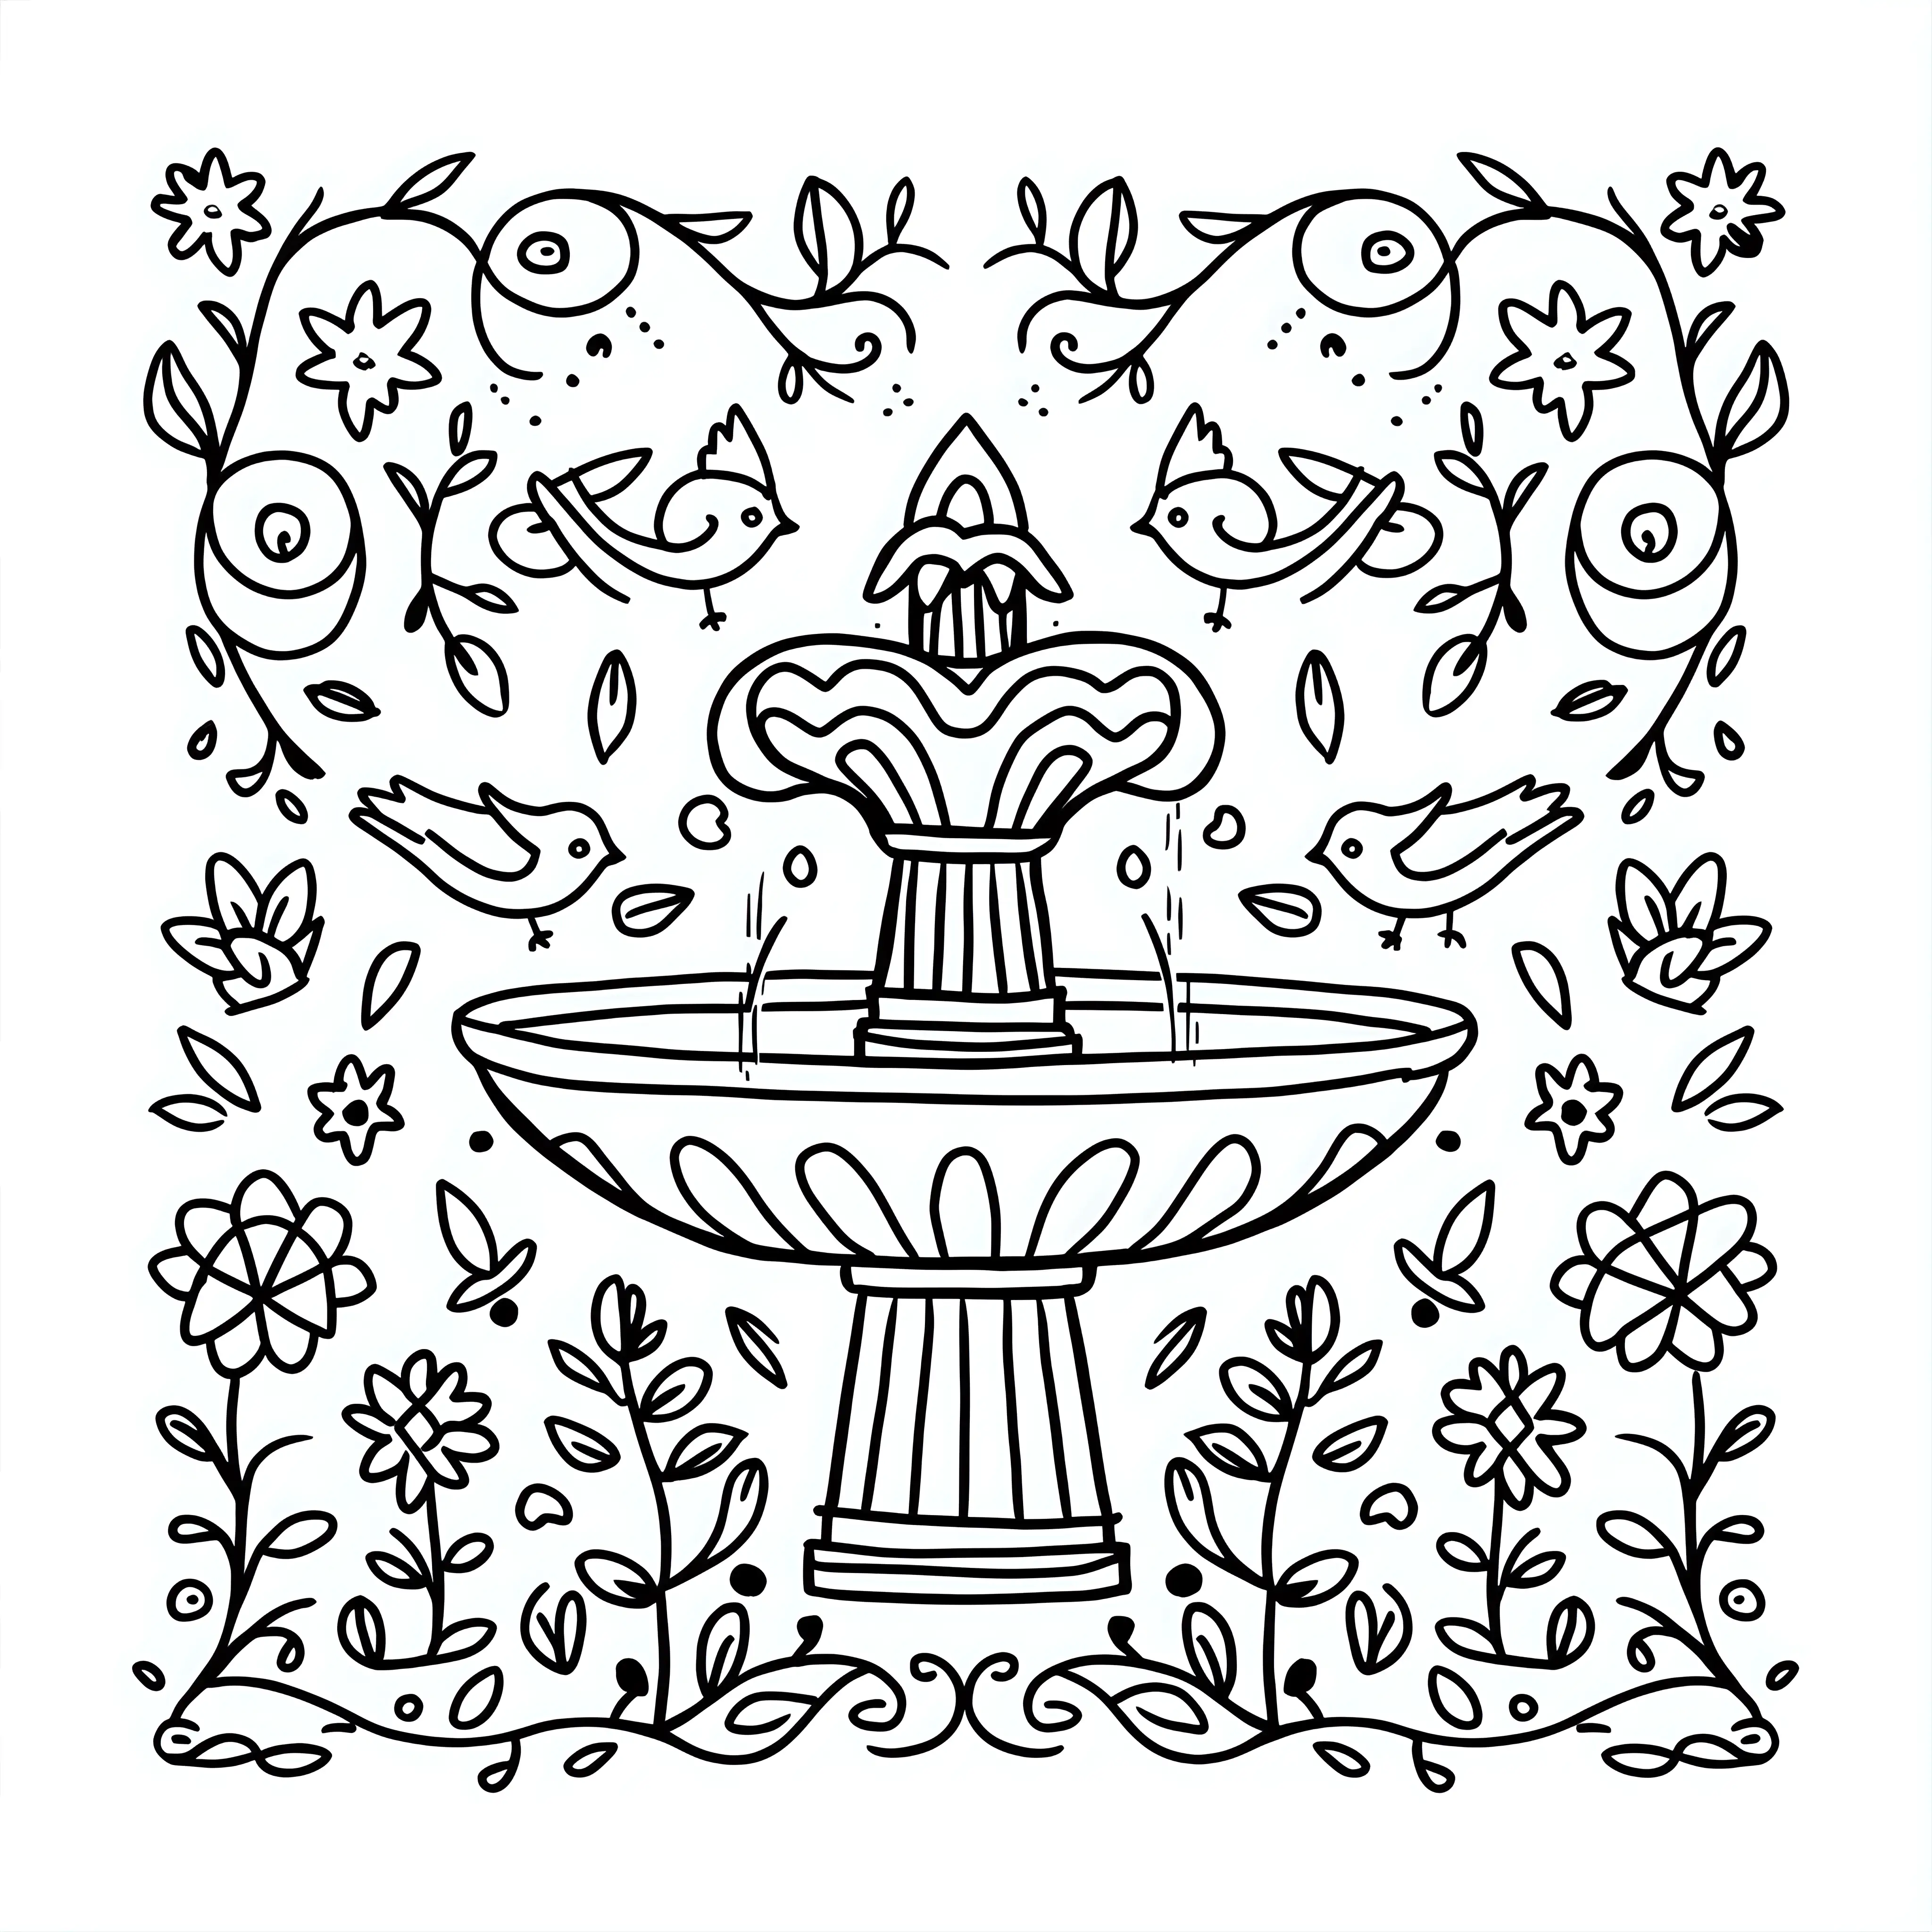 Adorable Fountain Pattern Coloring Page for Relaxation and Creativity